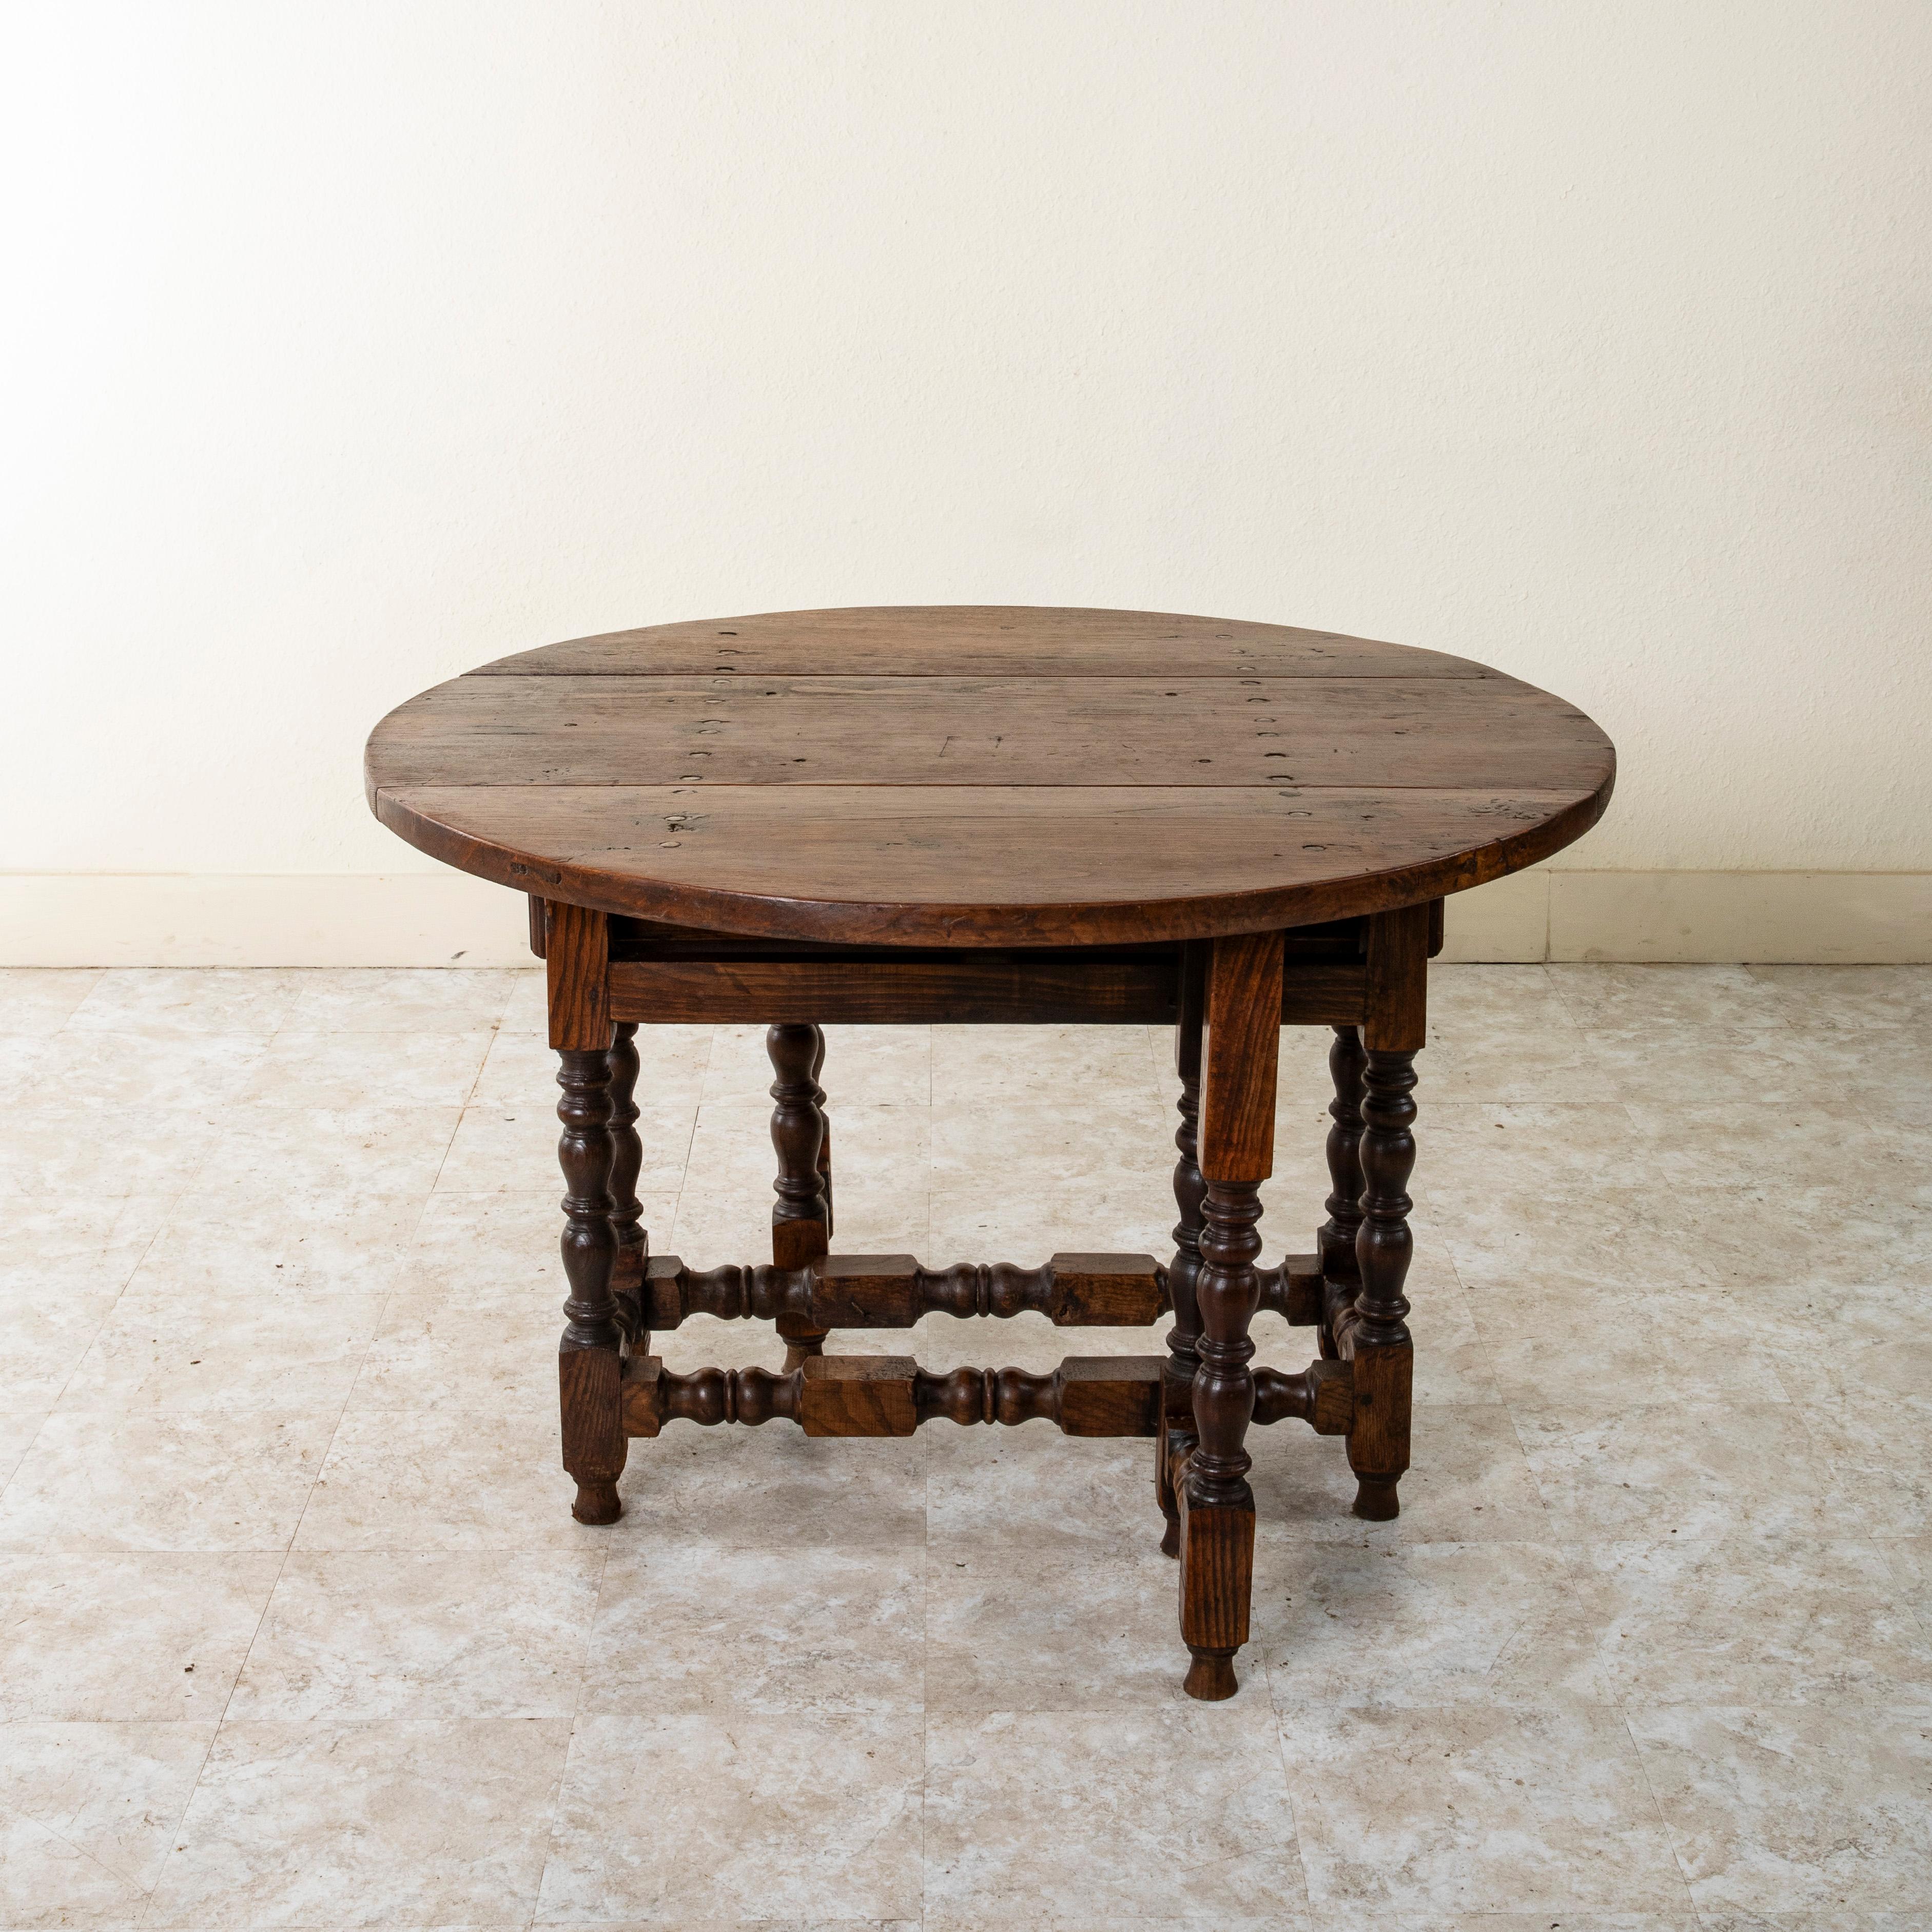 Found in the city or Perpignan, on the Spanish border in southern France, this large late nineteenth century oak gateleg table features a 47 inch diameter top with two drop leaves. The top is detailed with hand forged iron nails and each end of the